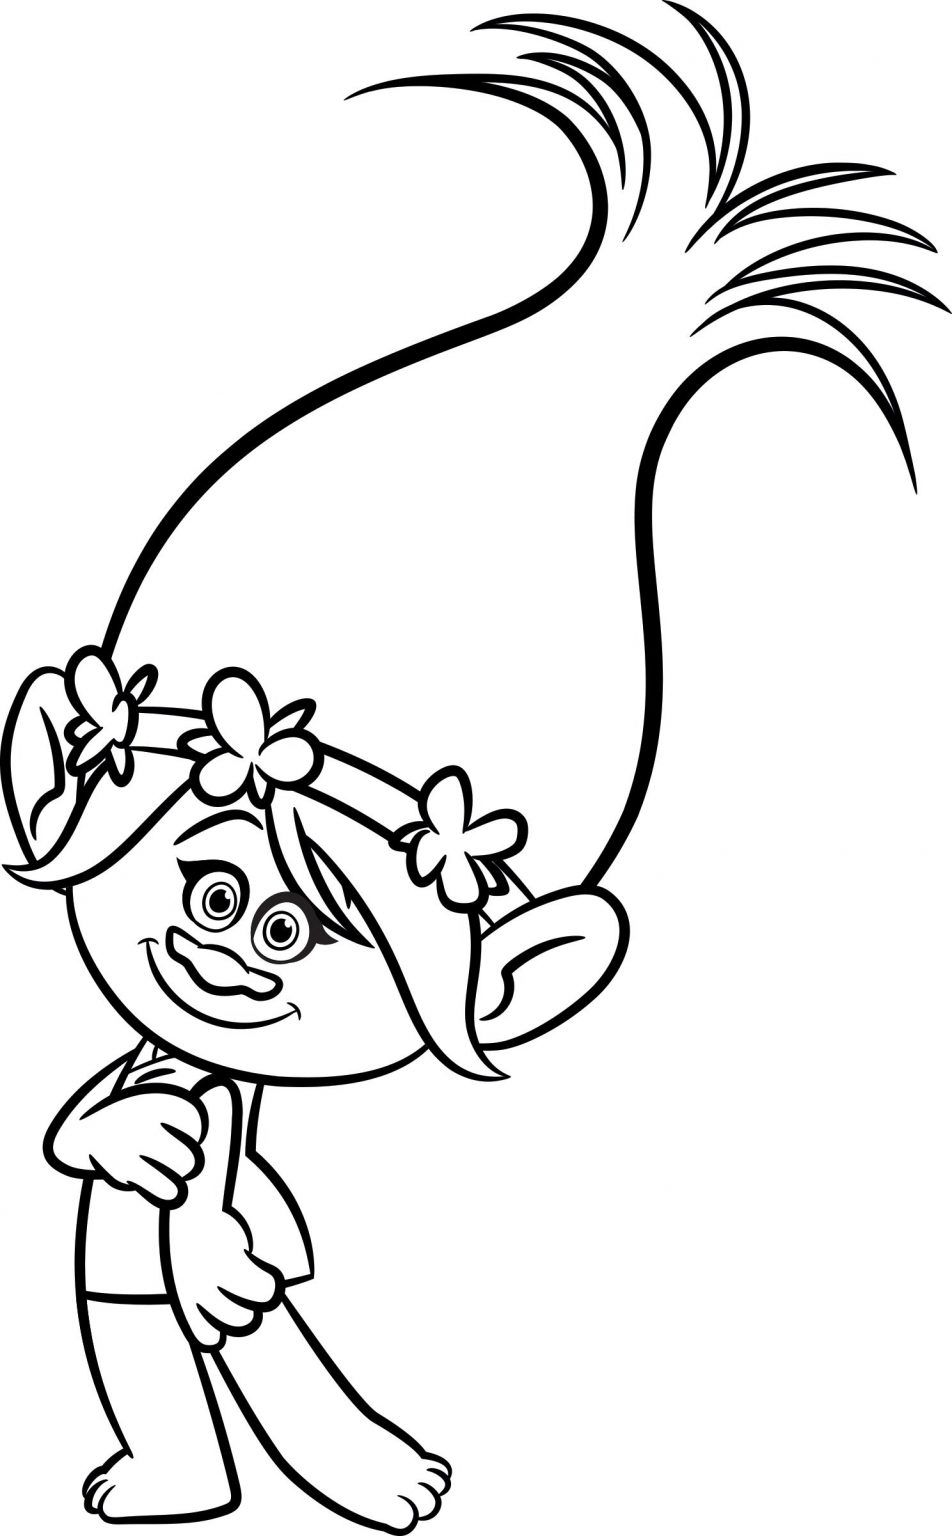 Poppy Troll Face Coloring Page | BubaKids.com